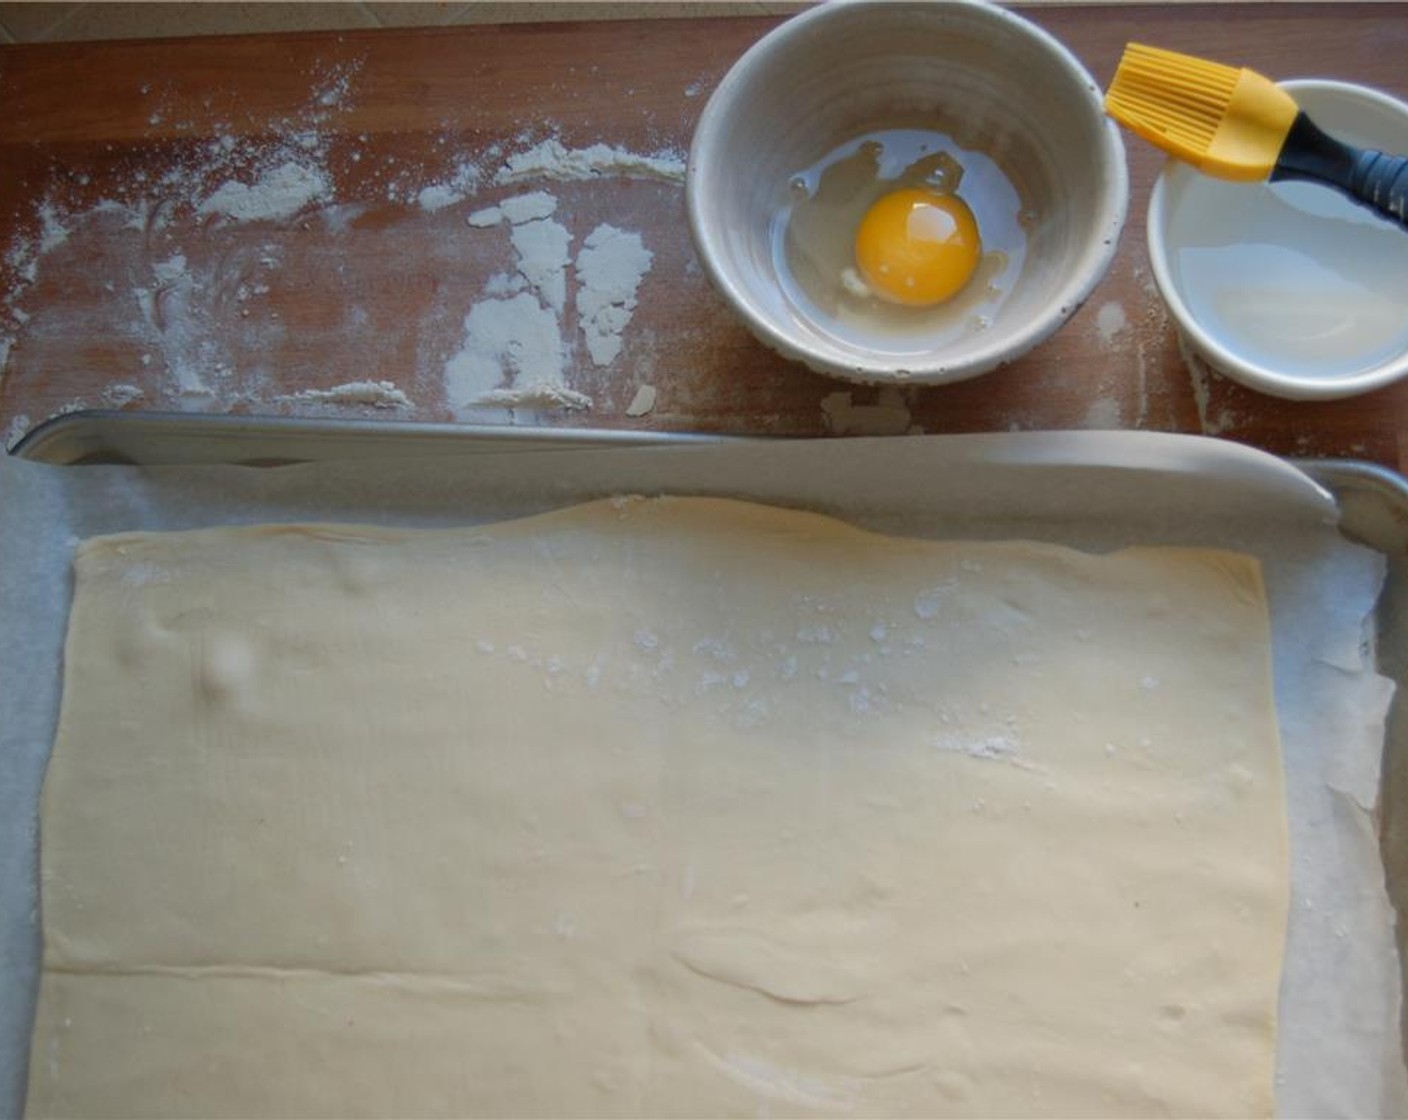 step 2 Roll out Puff Pastry (1)  on a lightly floured surface to a 10 x 11 rectangle. Transfer to a parchment lined baking sheet.